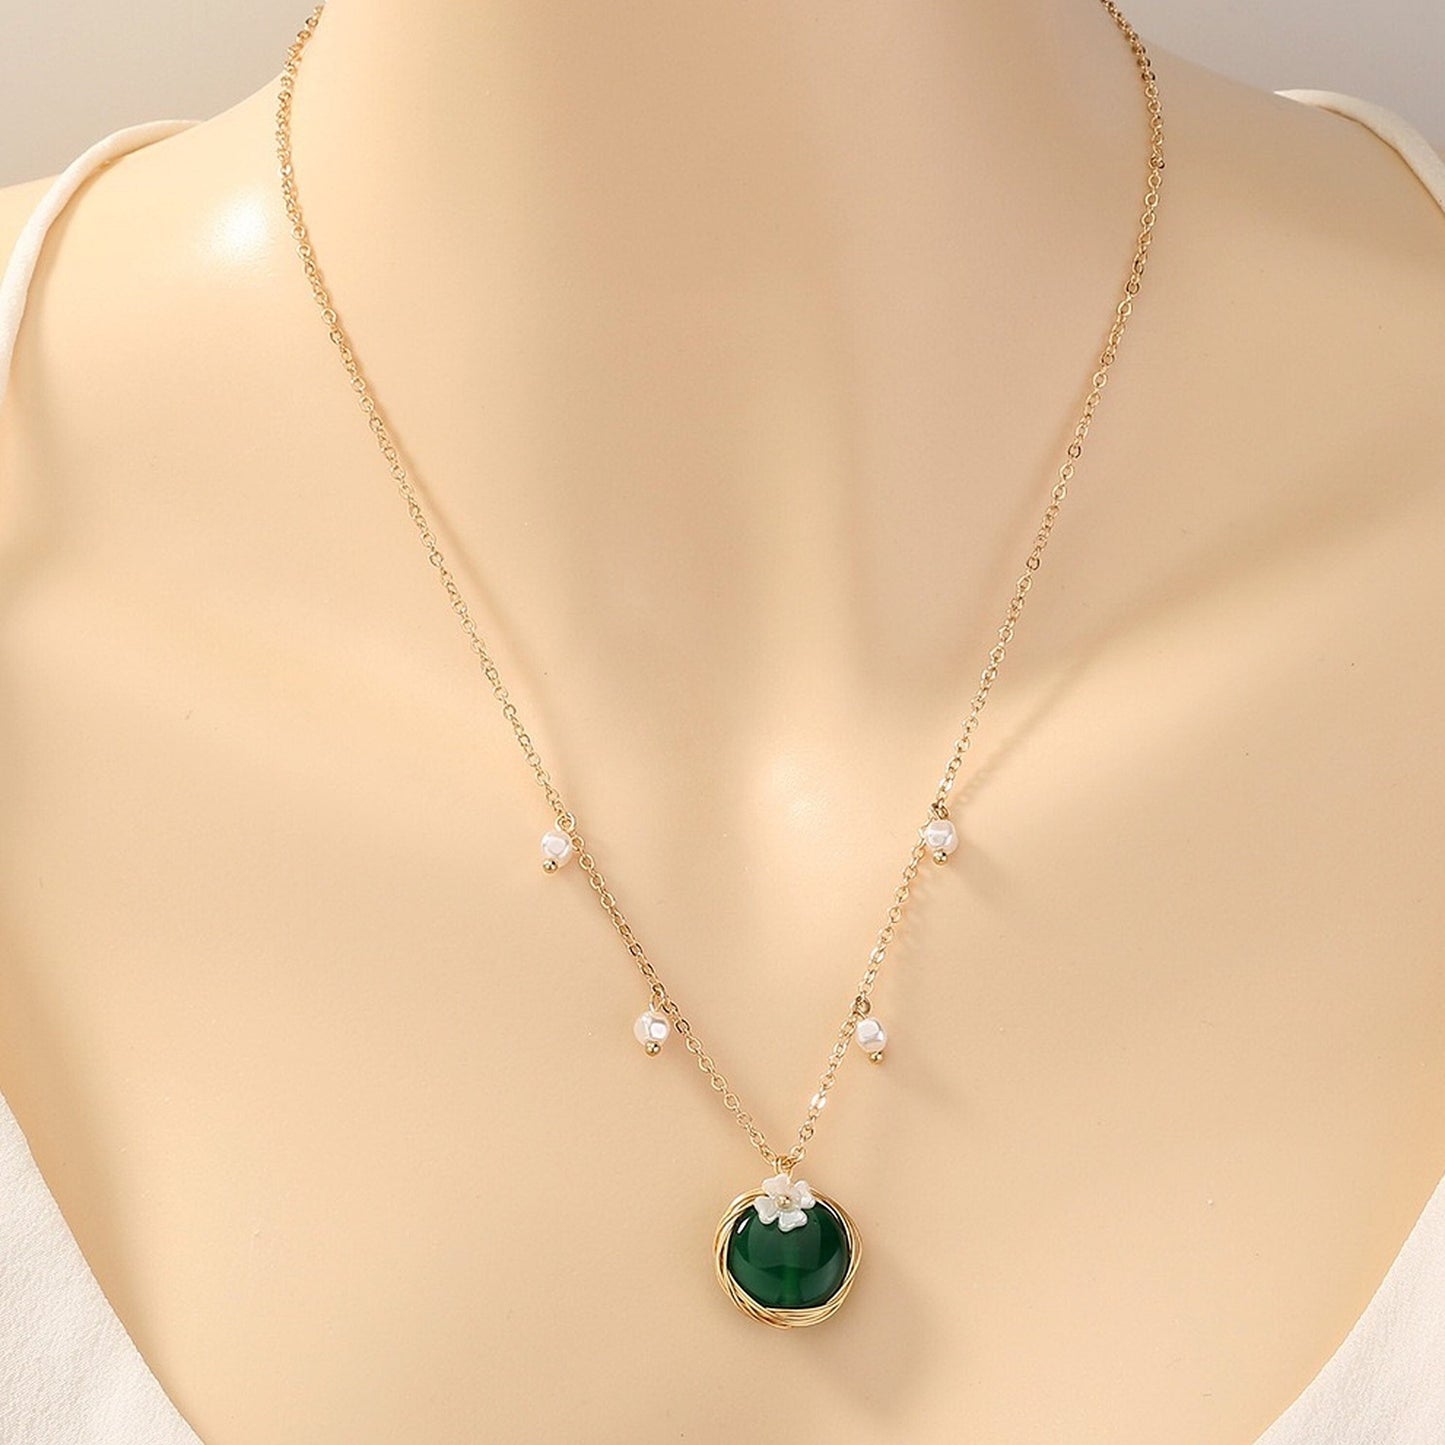 Emerald Green Jade Necklace, Round Pendant Necklace, Floral Pearl Layering Necklace, Agate Necklace, Layered Necklace, Birthday Gift for Her